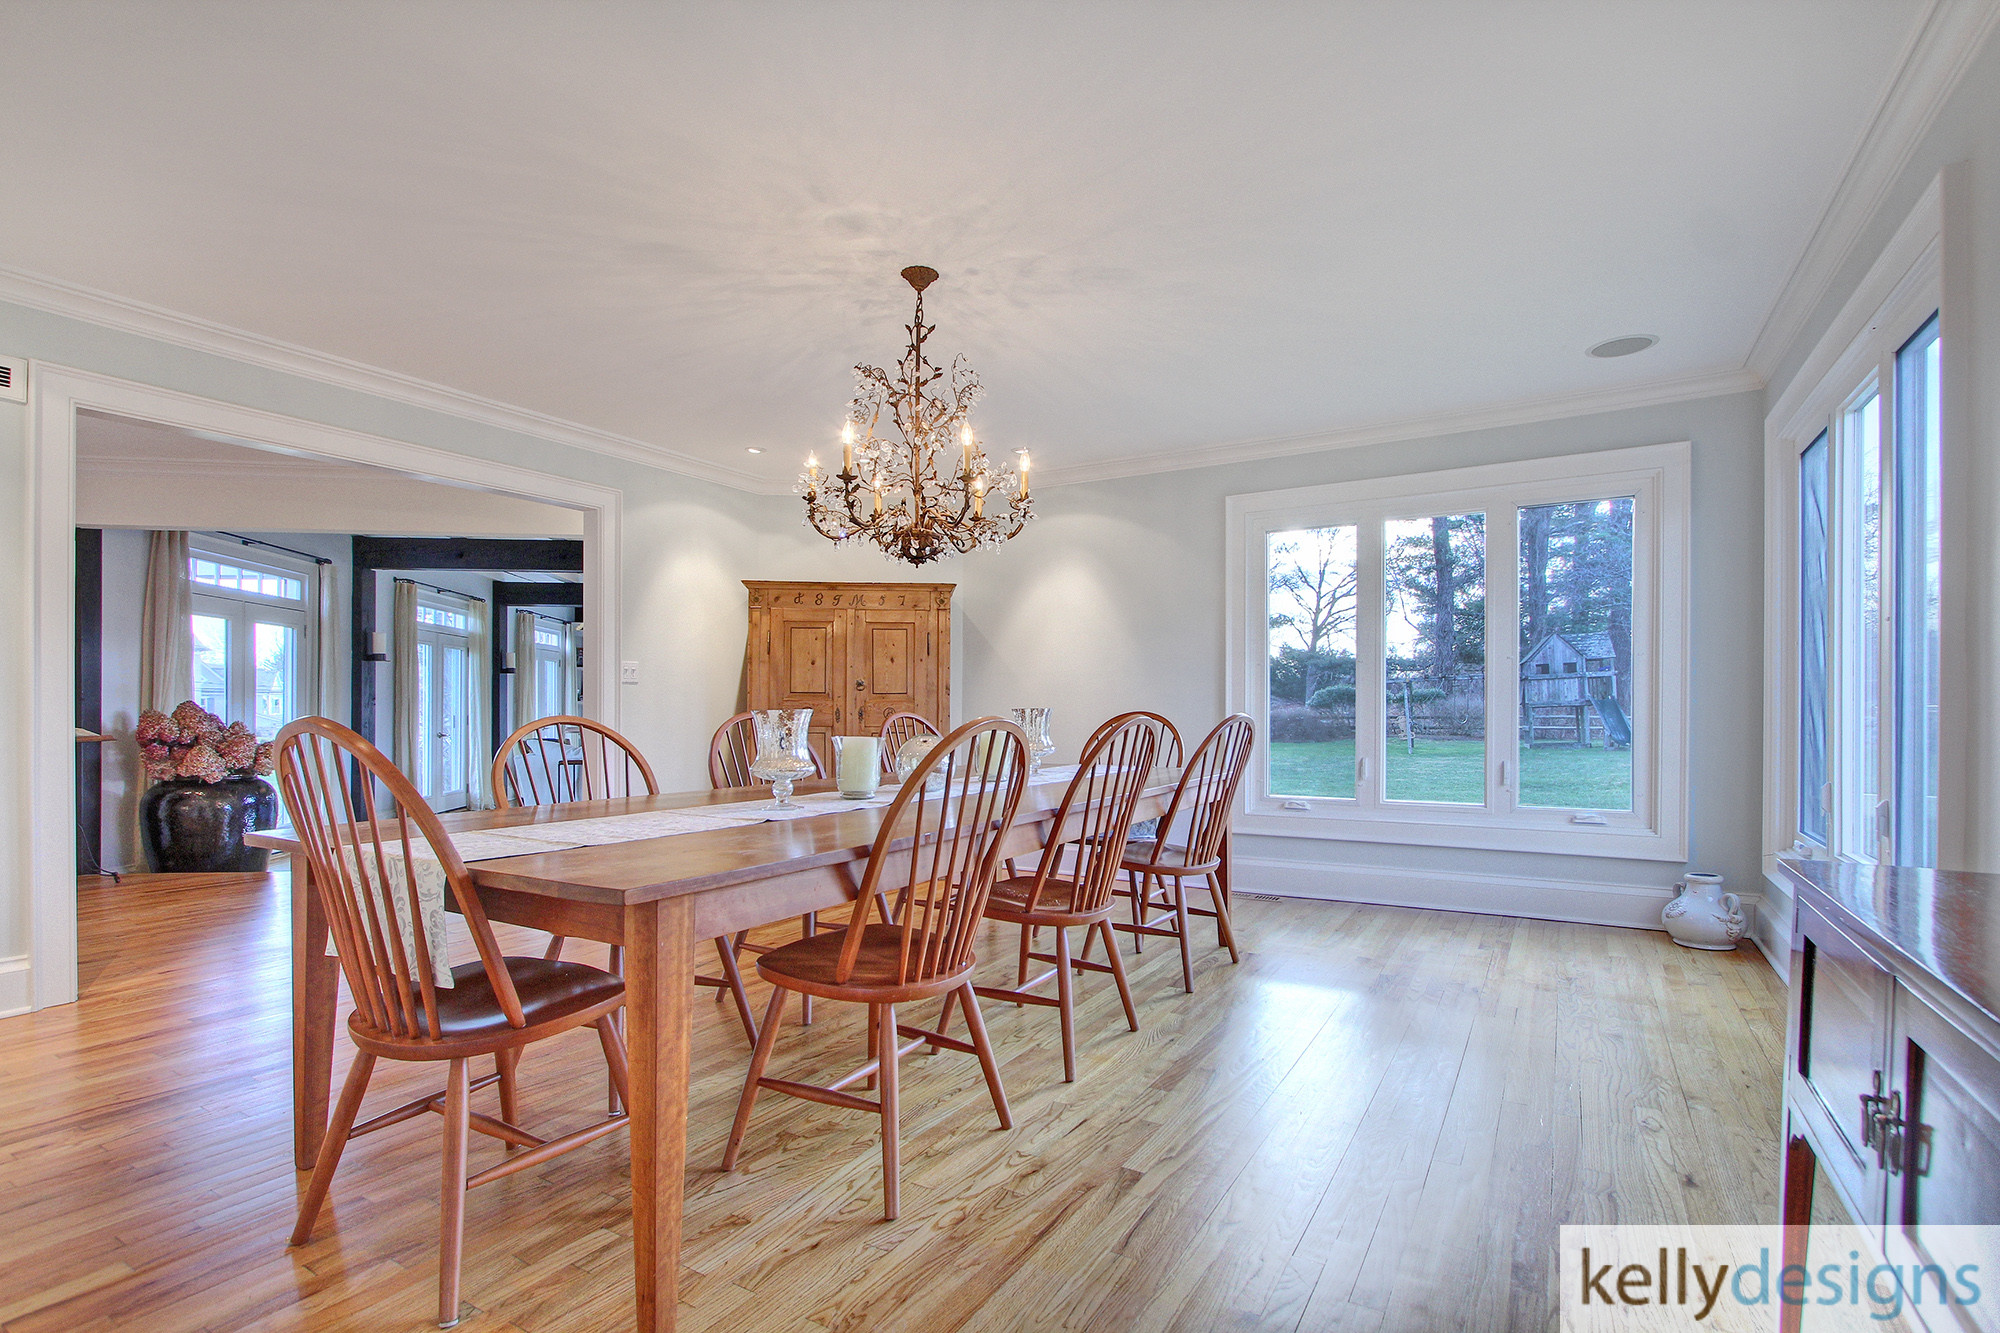 Spectacular Staging In Beachside Home   Home Staging By kellydesigns -  Dining room